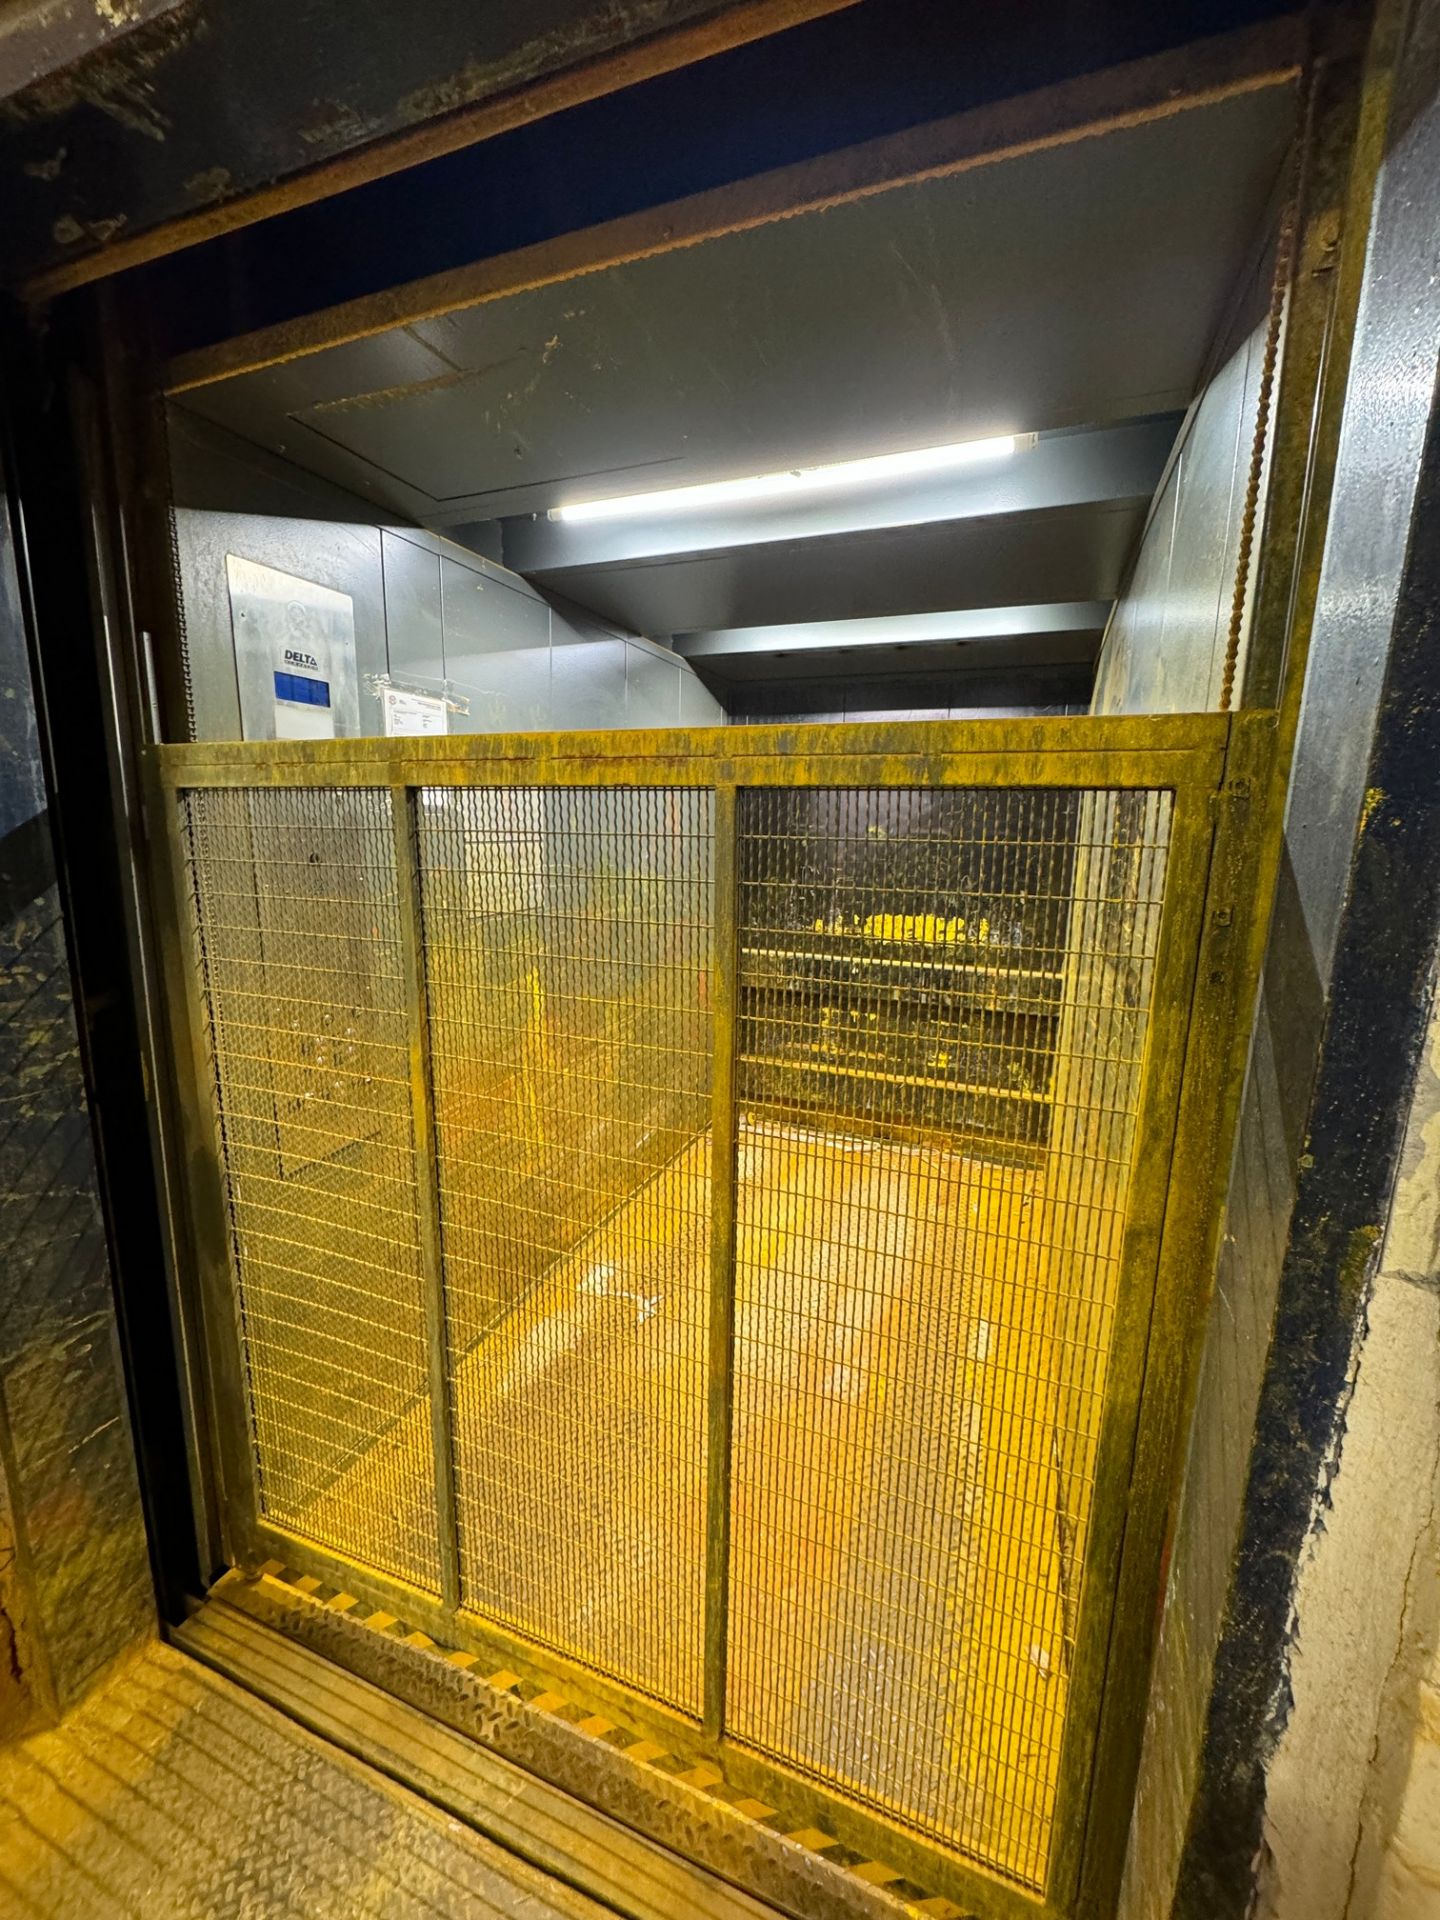 PEELE FREIGHT ELEVATOR (NOTE: SUBJECT TO LATE REMOVAL, PICKUP END OF AUGUST) (RIGGING FEE $10,900